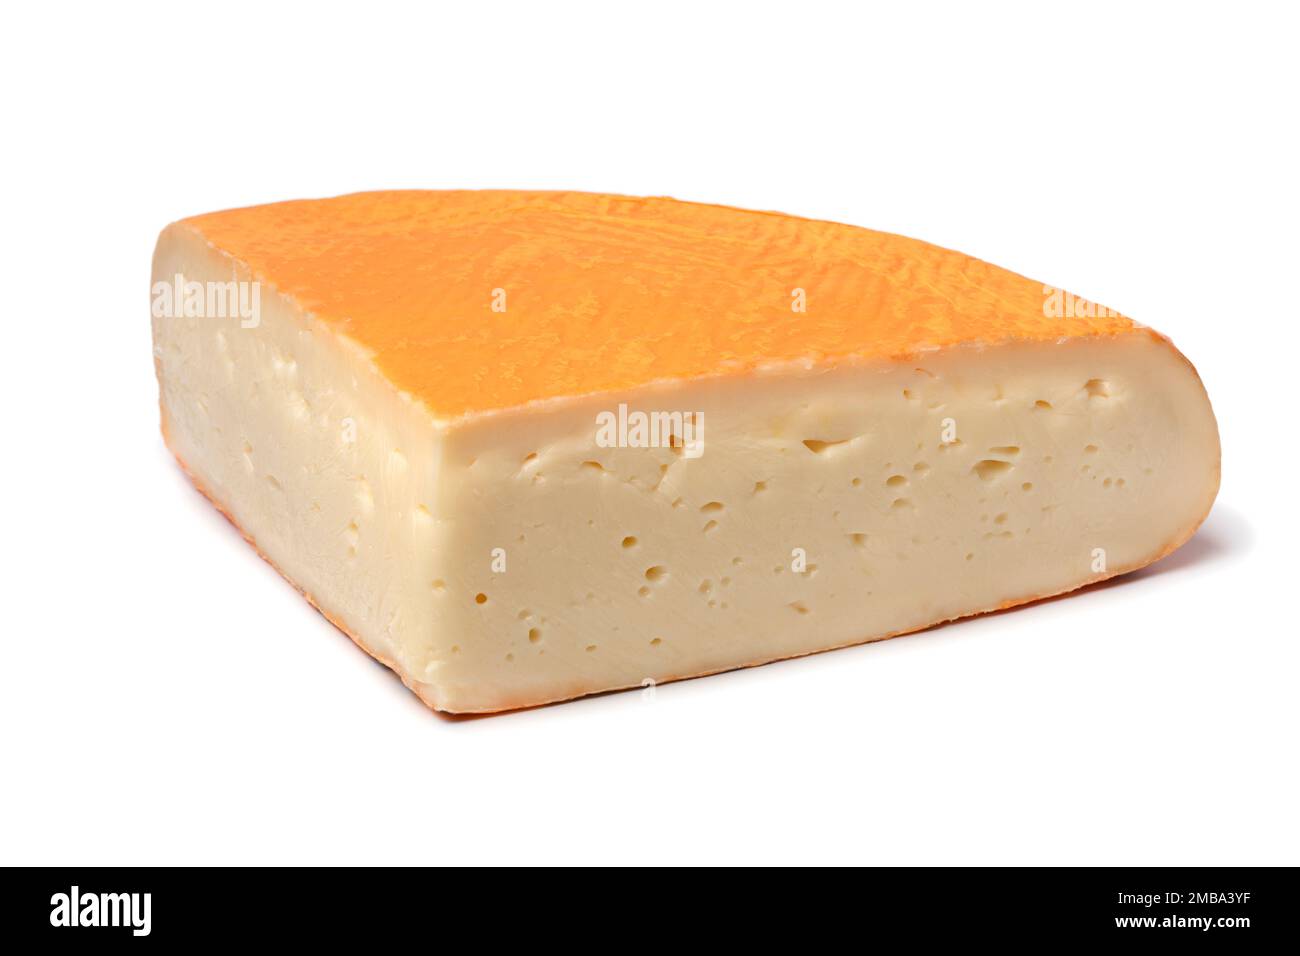 Piece of fresh Chaumes cheese close up isolated on white background Stock Photo